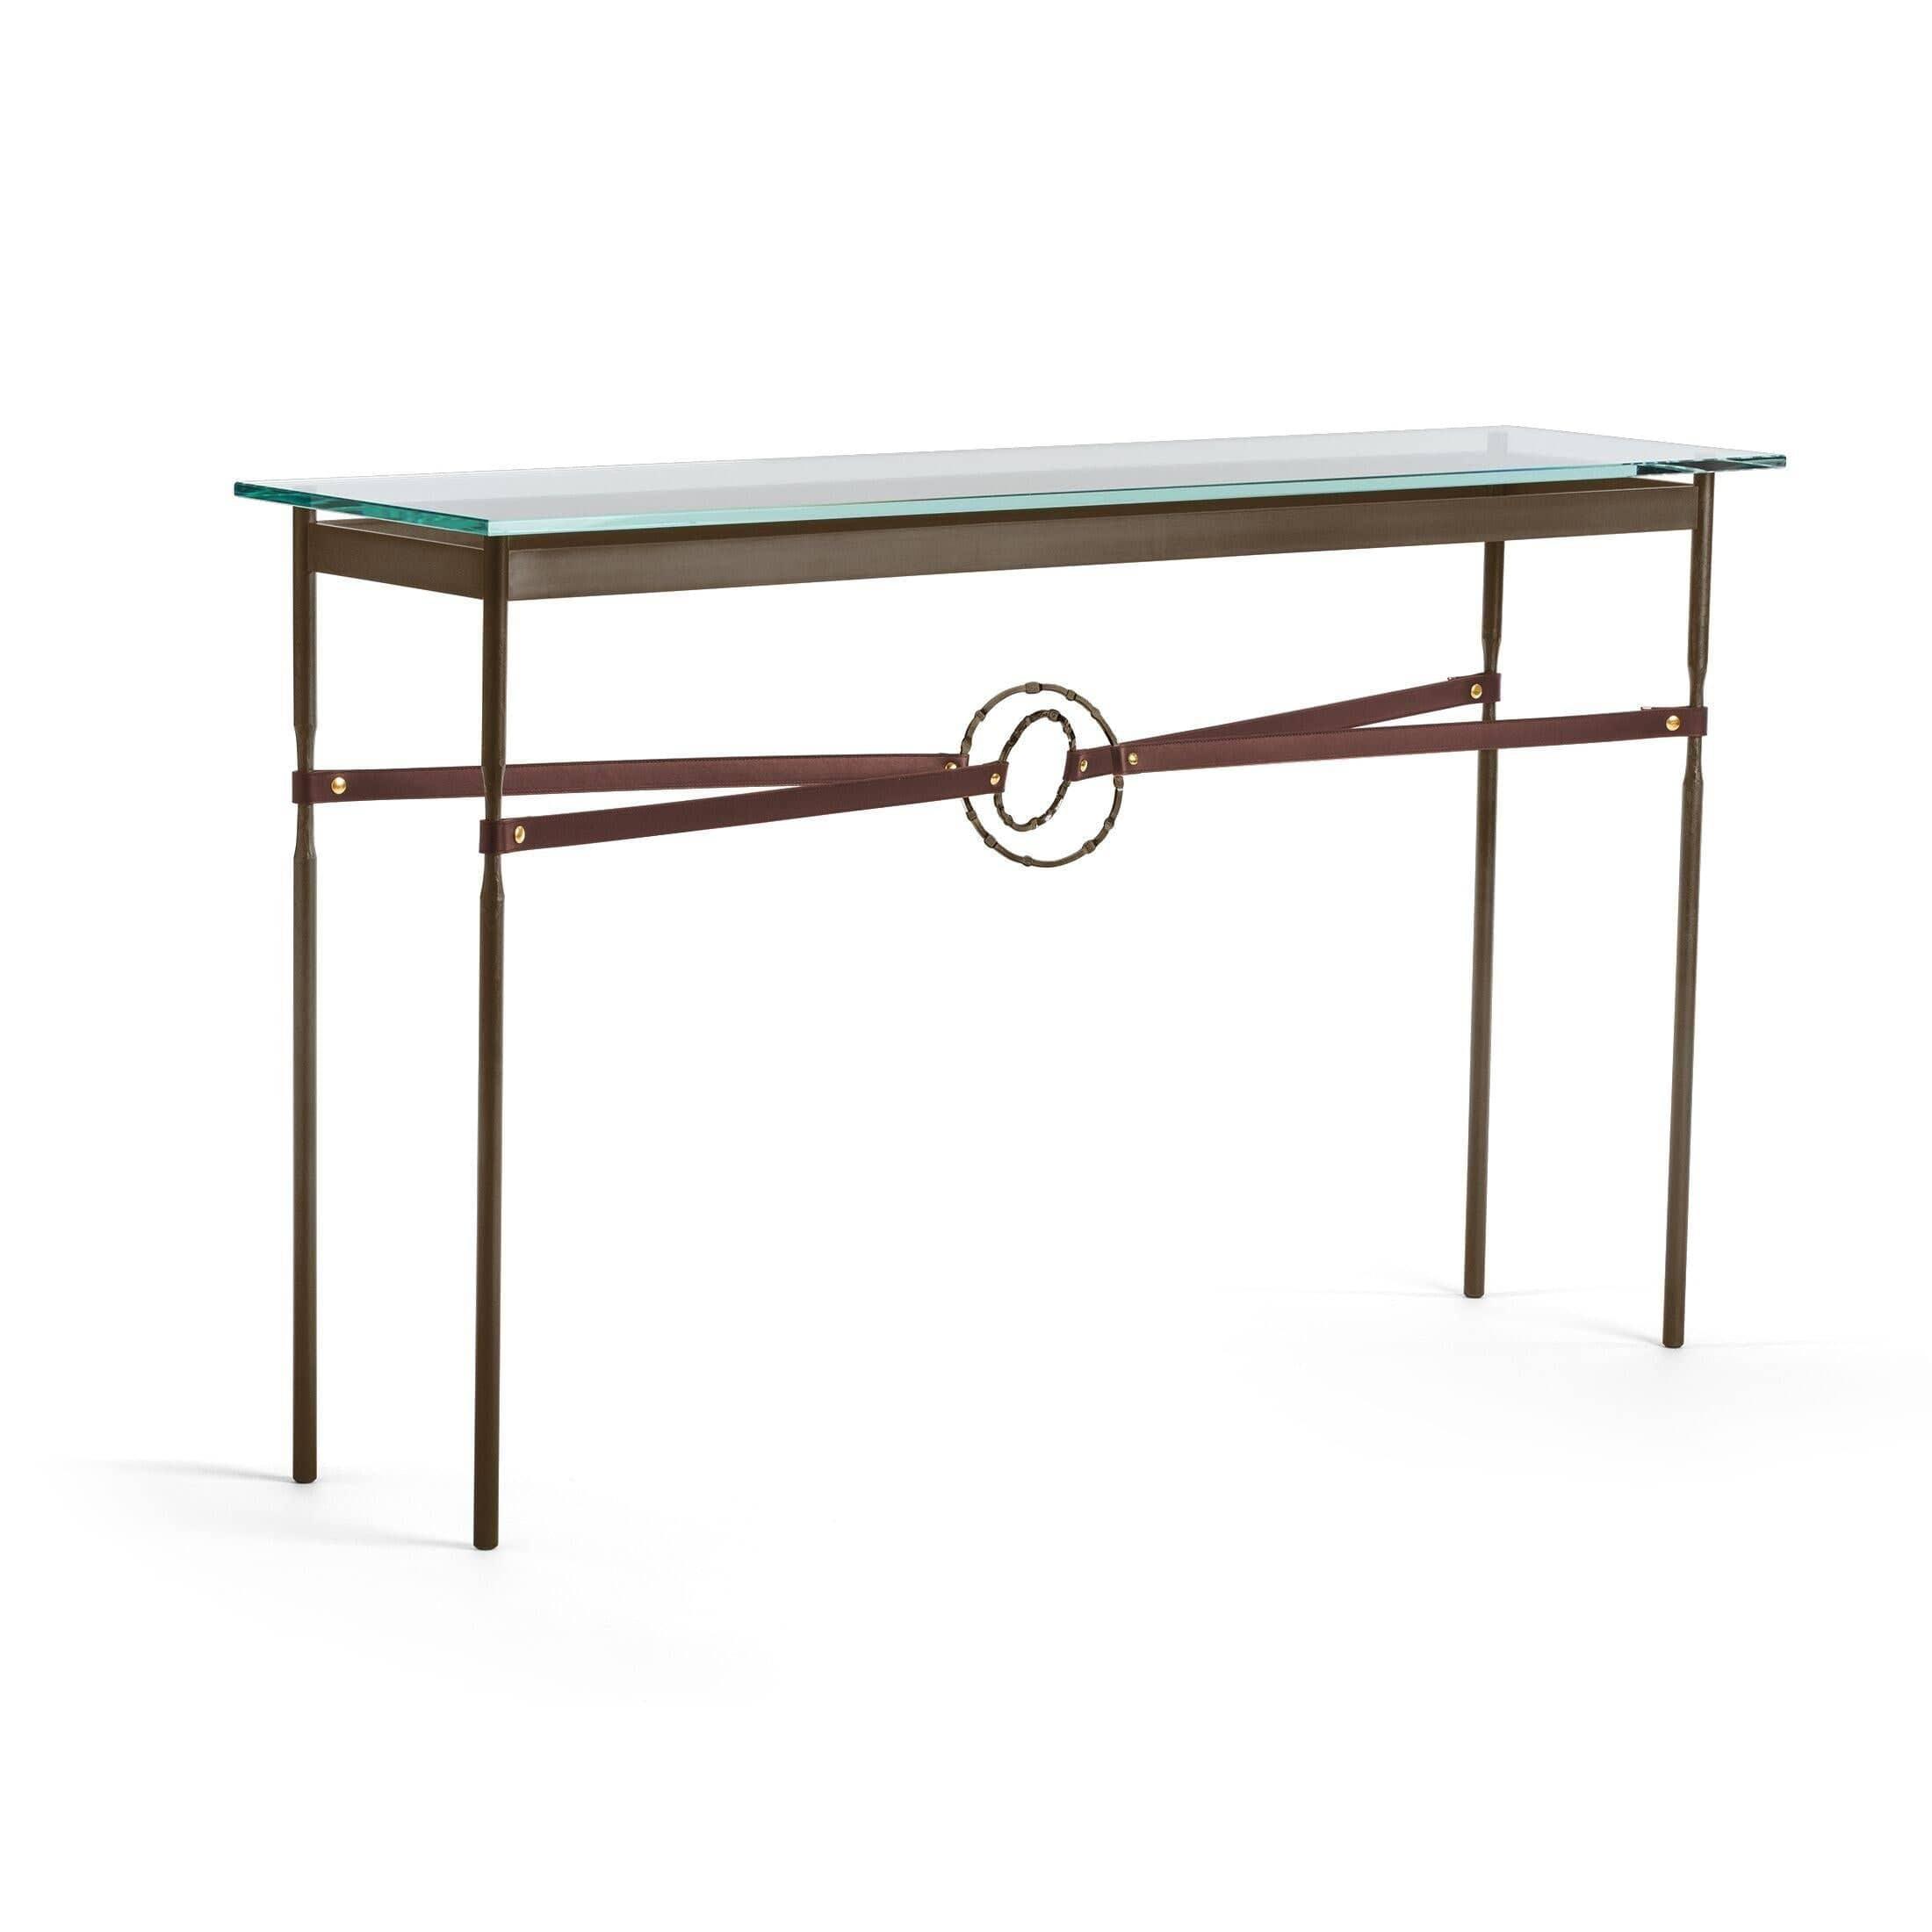 Hubbardton Forge - Equus Brown Leather Console Table - 750118-05-05-LB-VA0714 | Montreal Lighting & Hardware